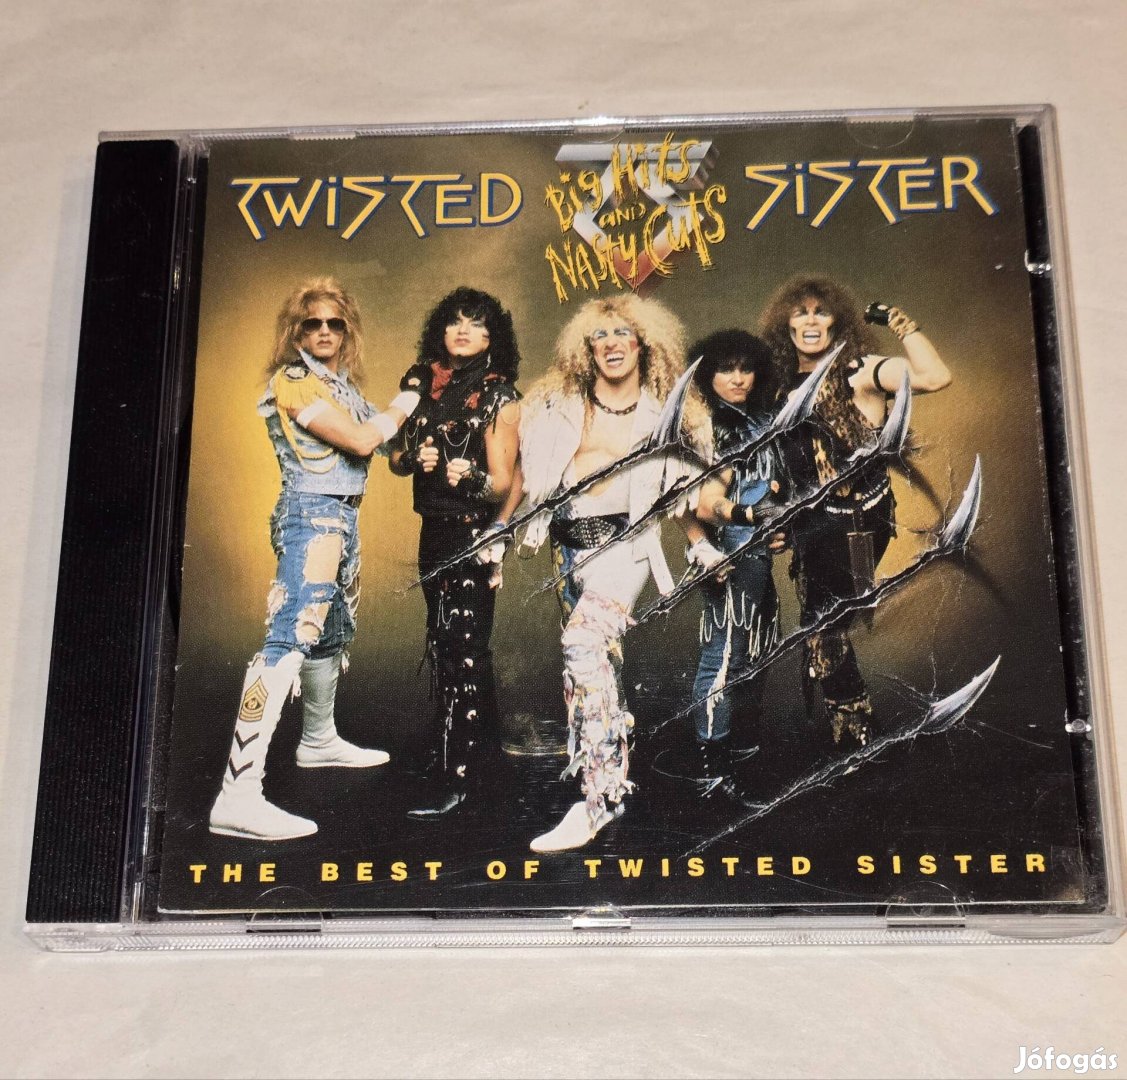 Twisted Sister:Big hits and nasty cuts CD(The best of) 